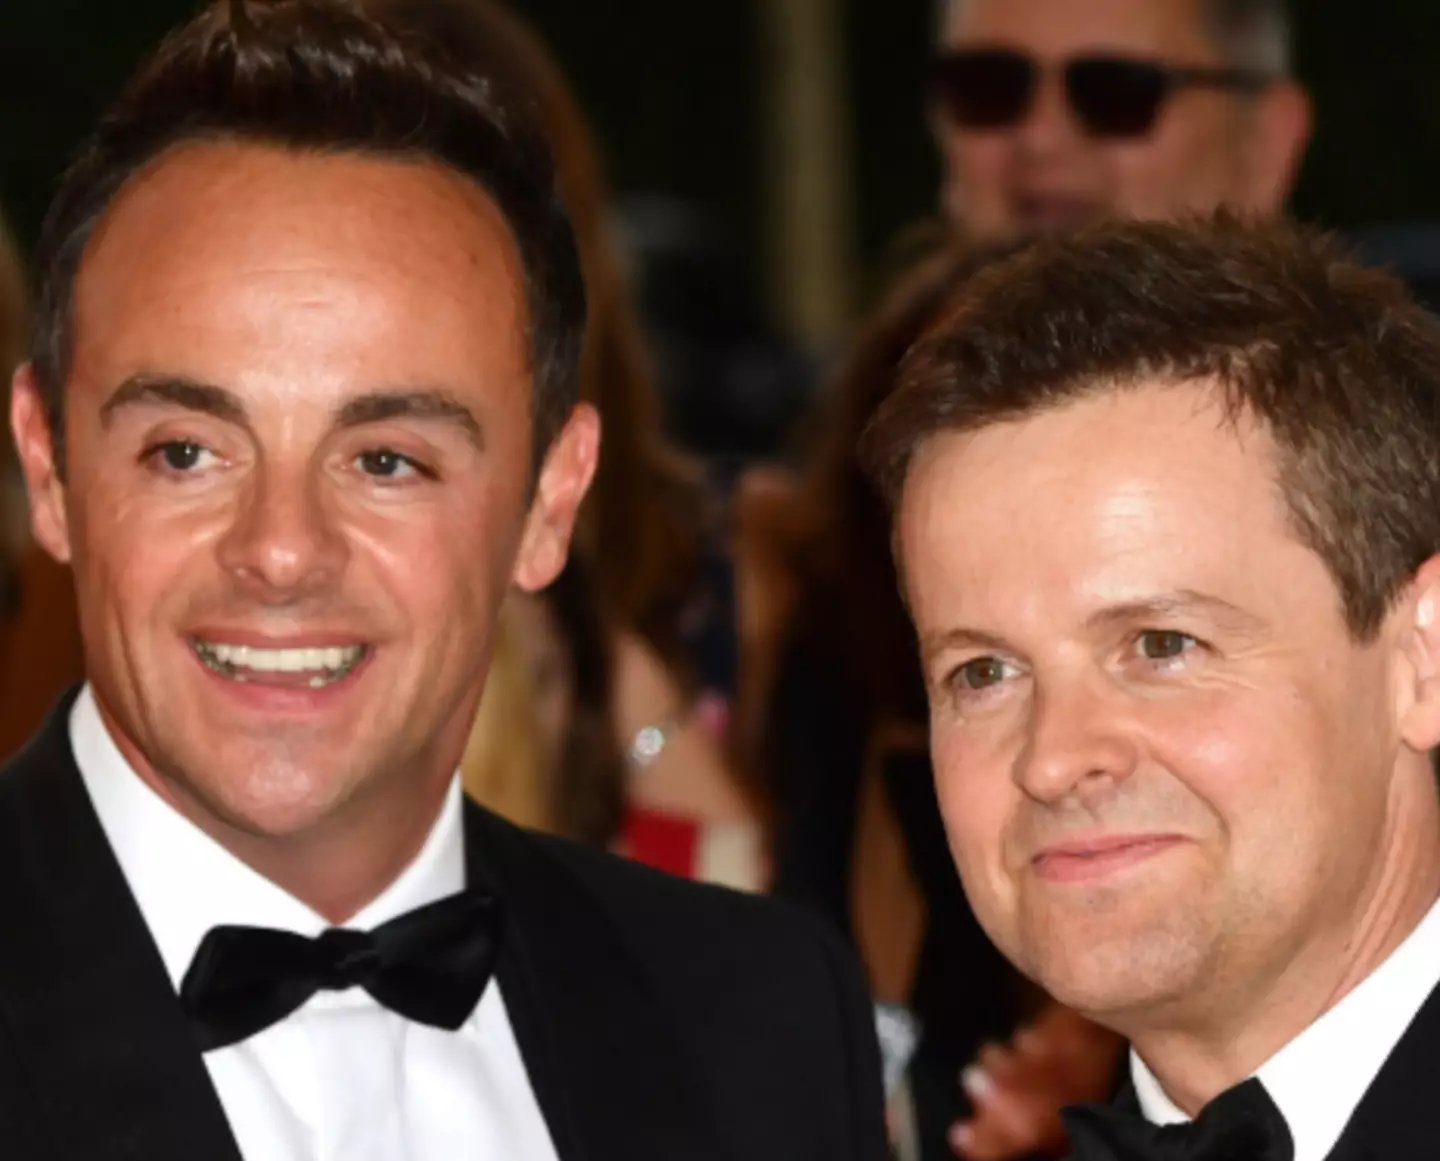 Ant and Dec secured their 22nd win.